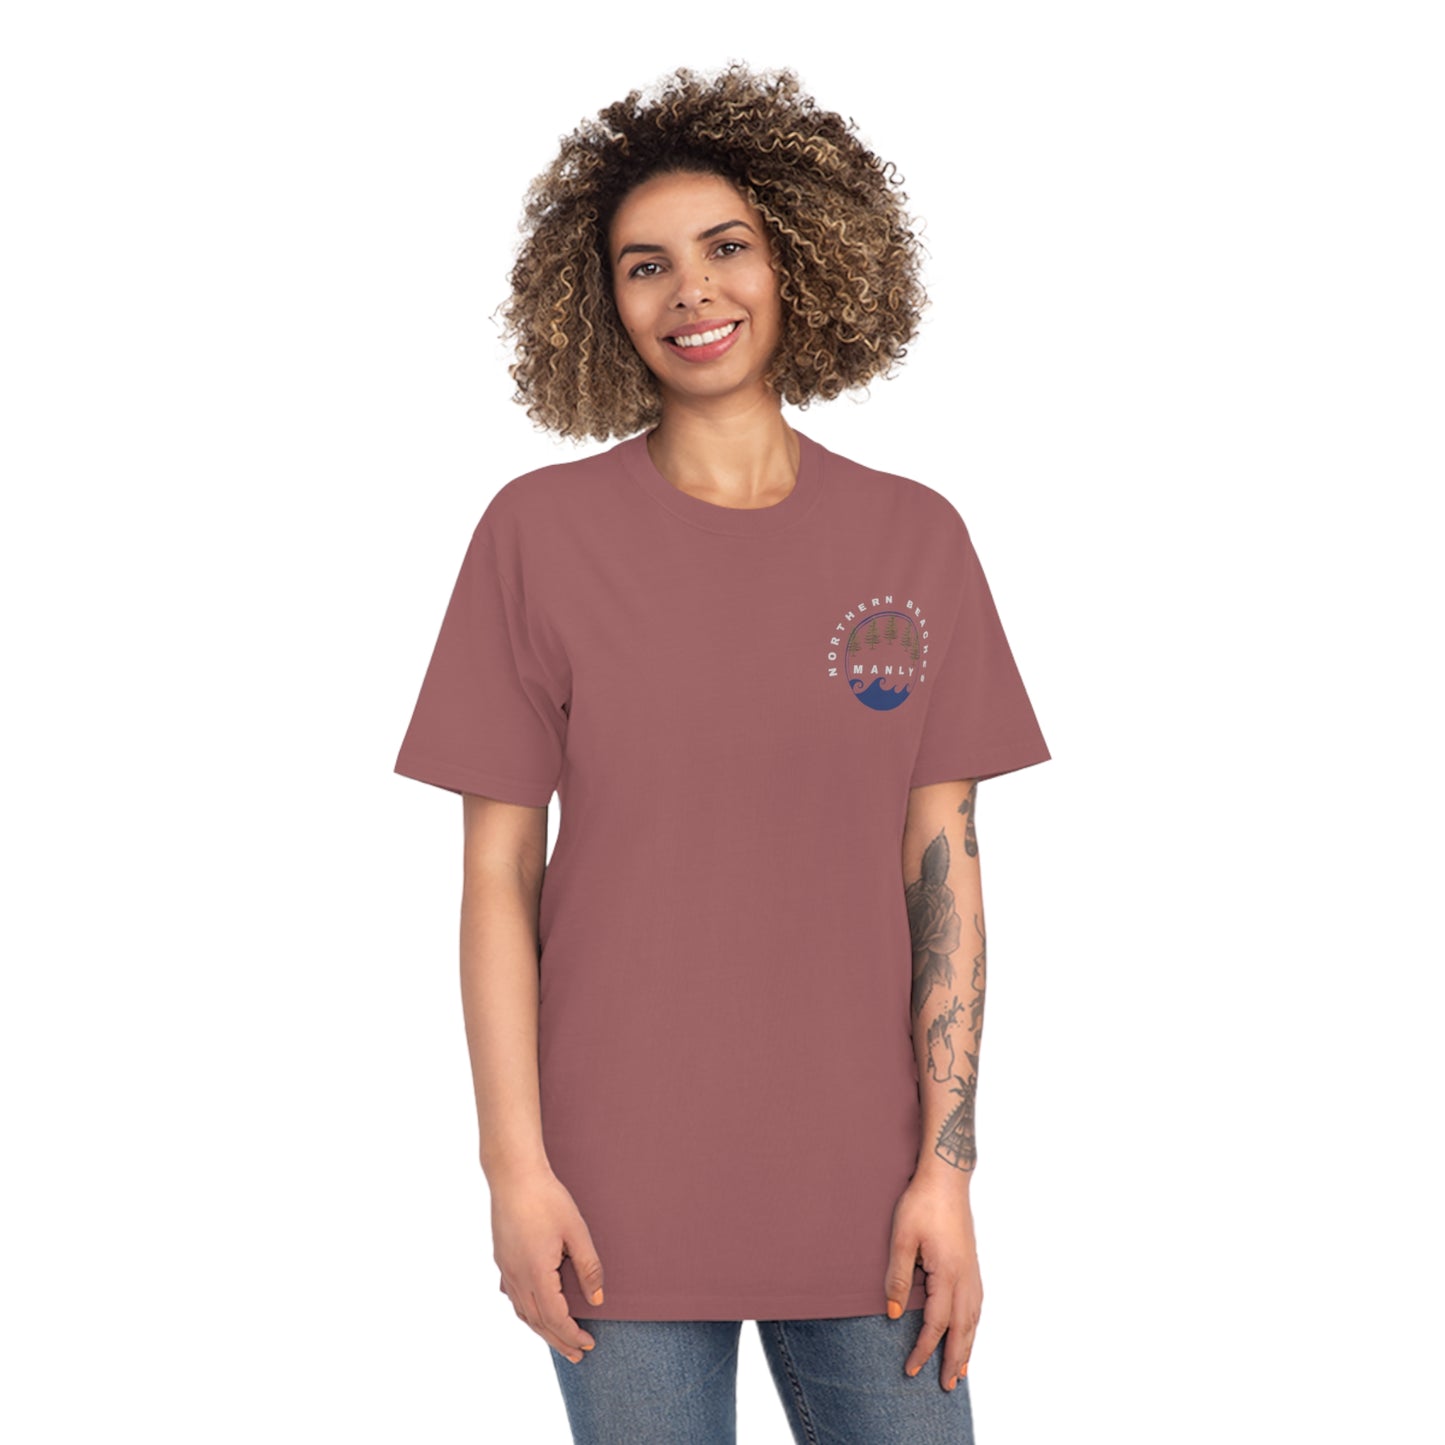 Cotton T-Shirt Northern Beaches Manly logo